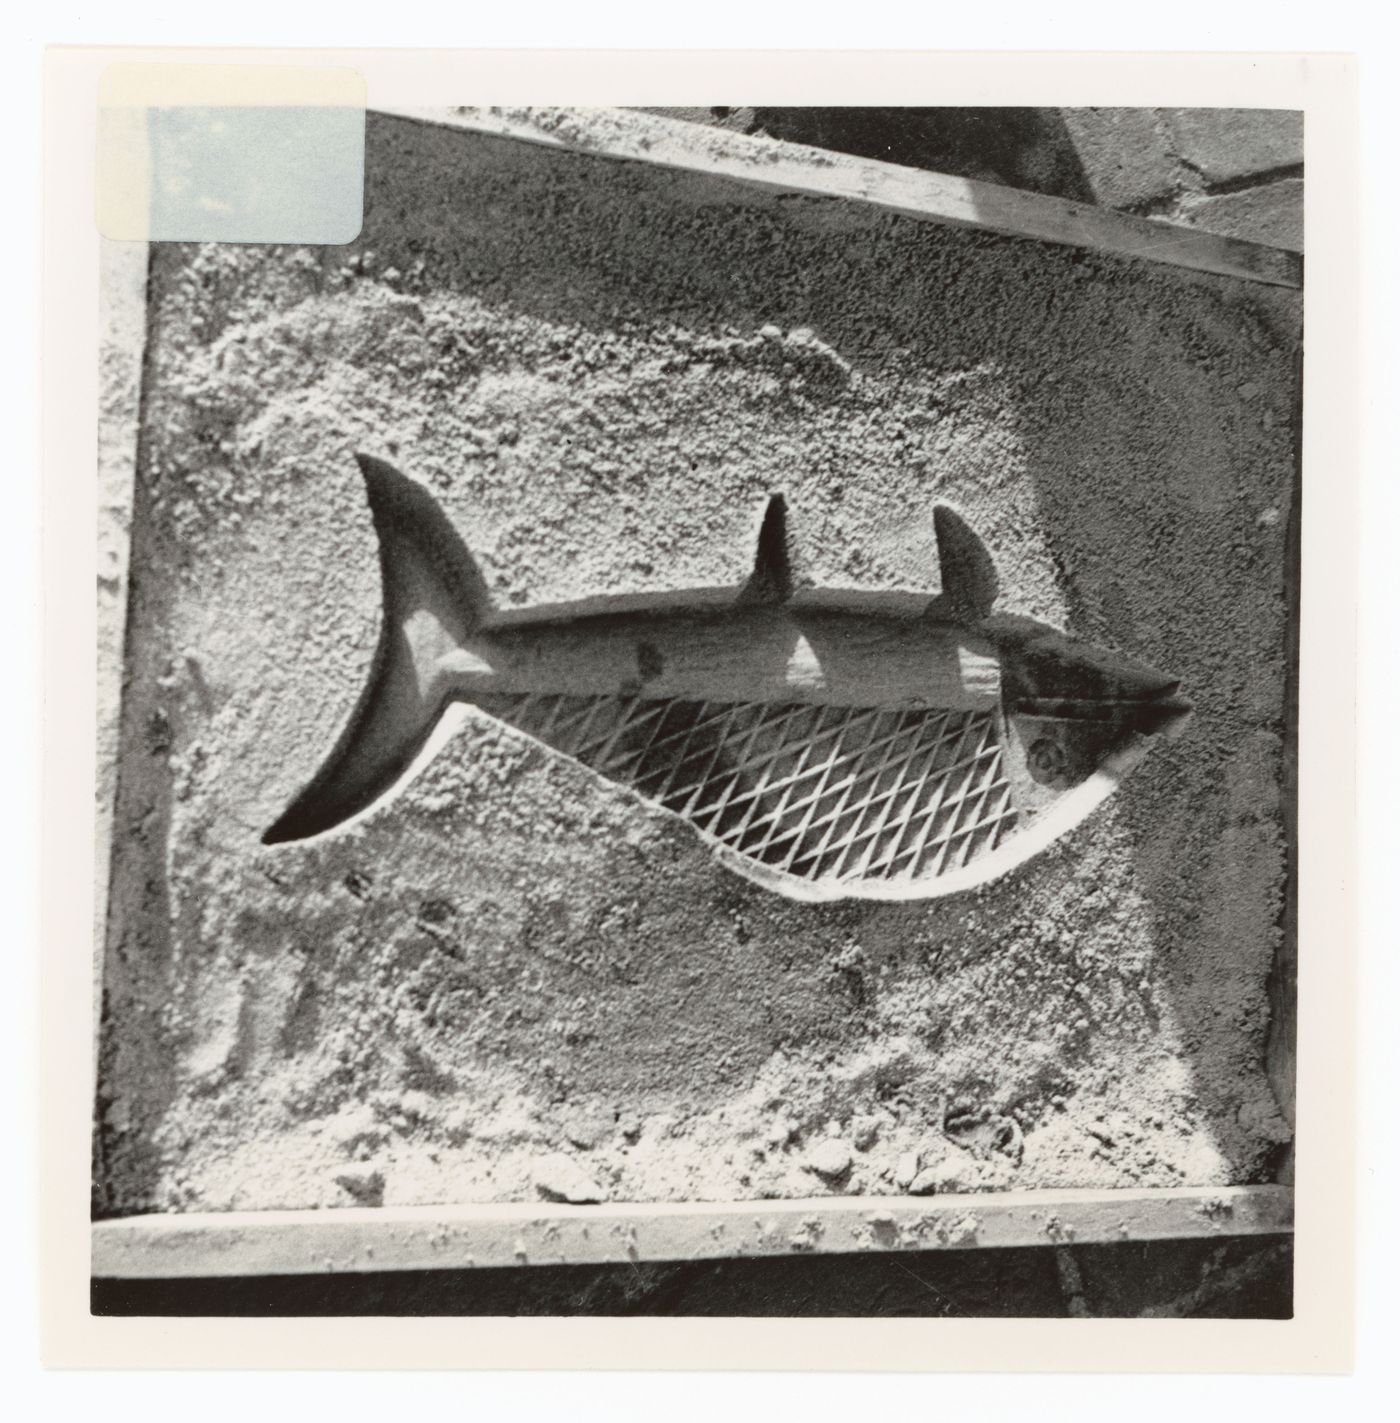 View of a bas-relief of a fish sign by Le Corbusier, Chandigarh, India